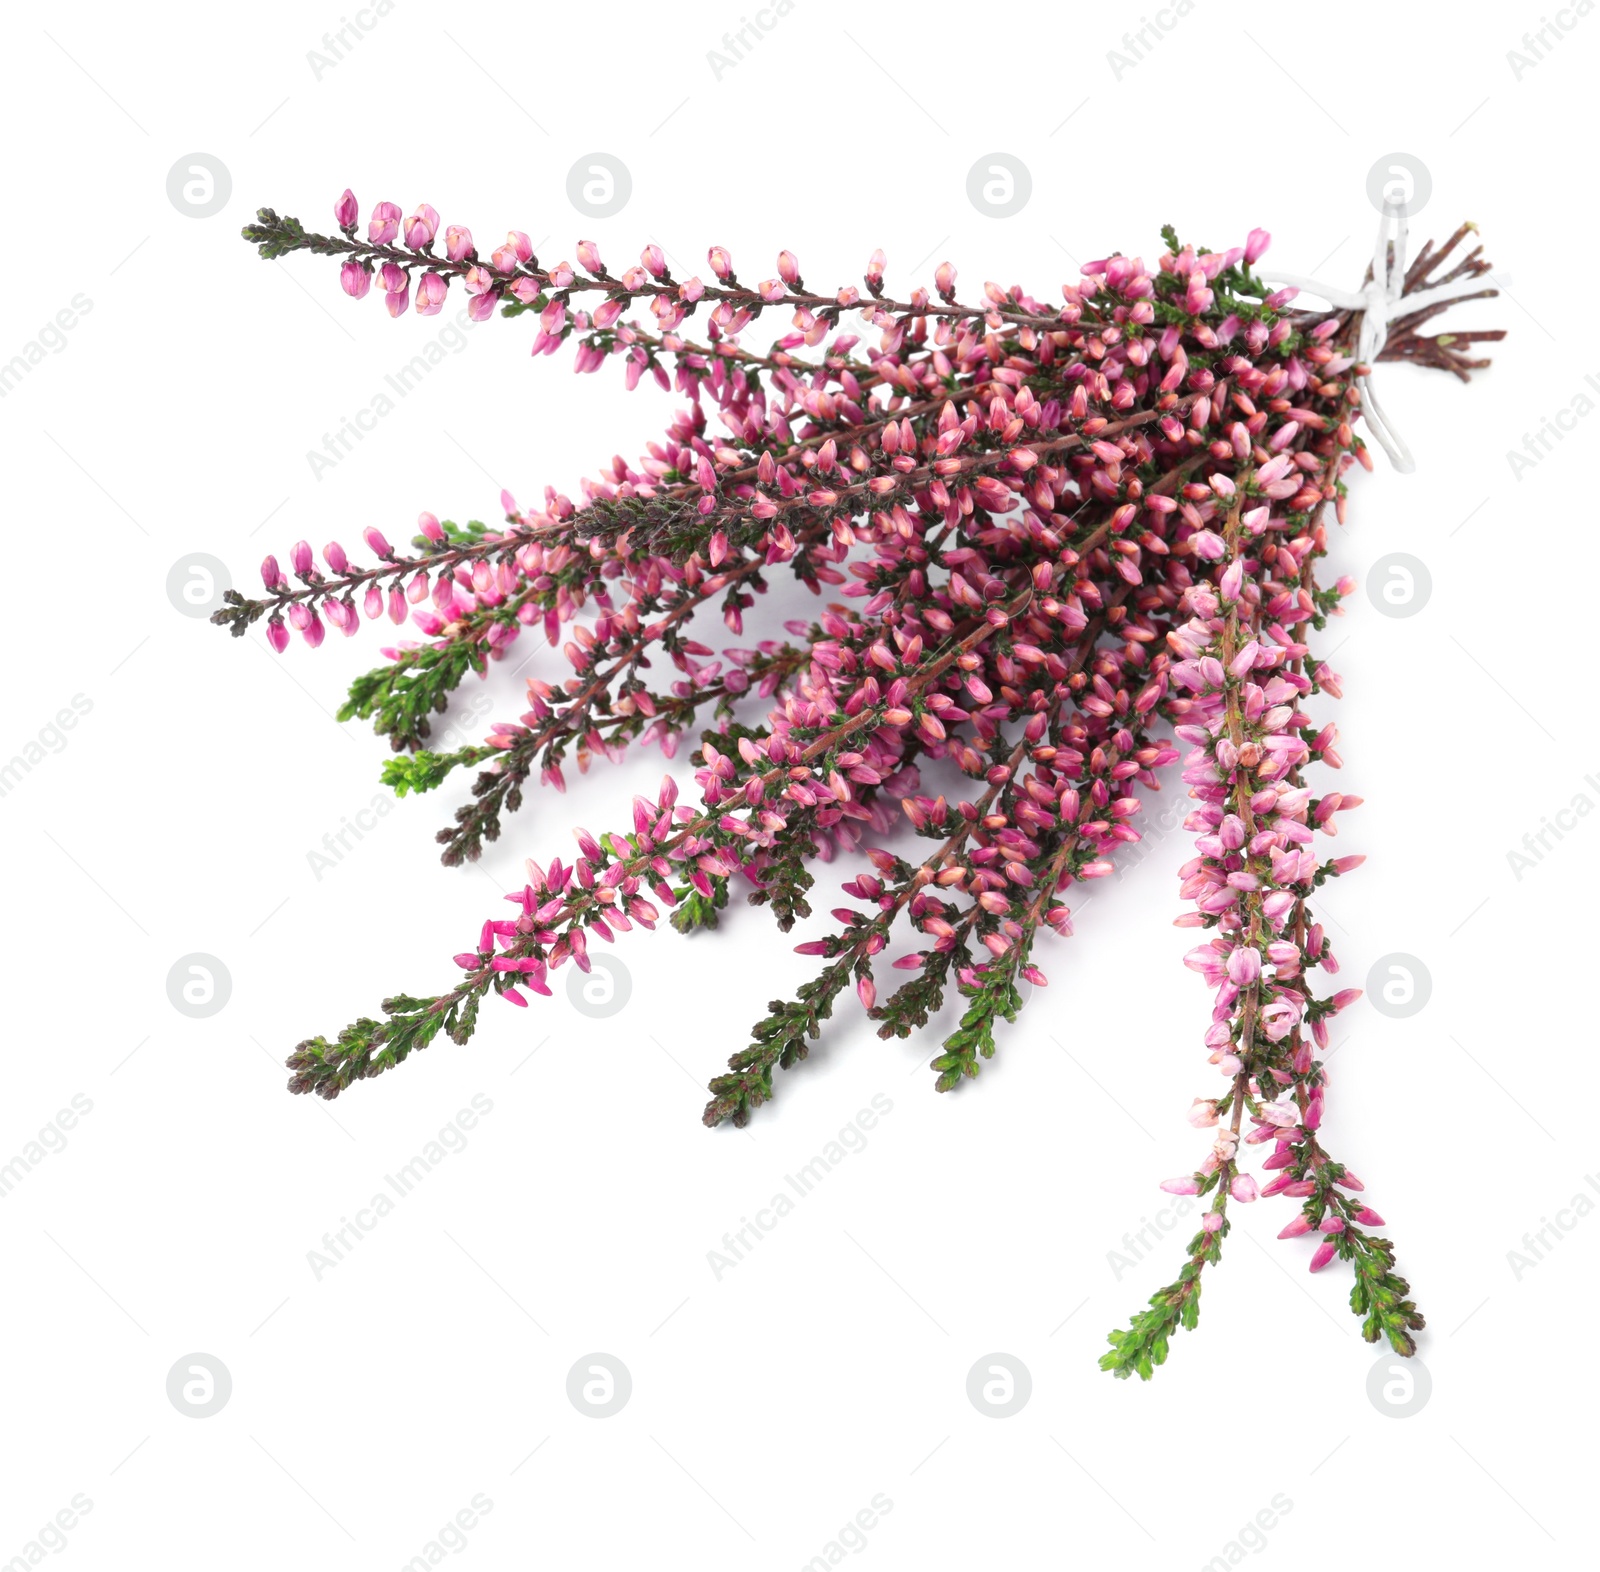 Photo of Bunch of heather branches with beautiful flowers isolated on white